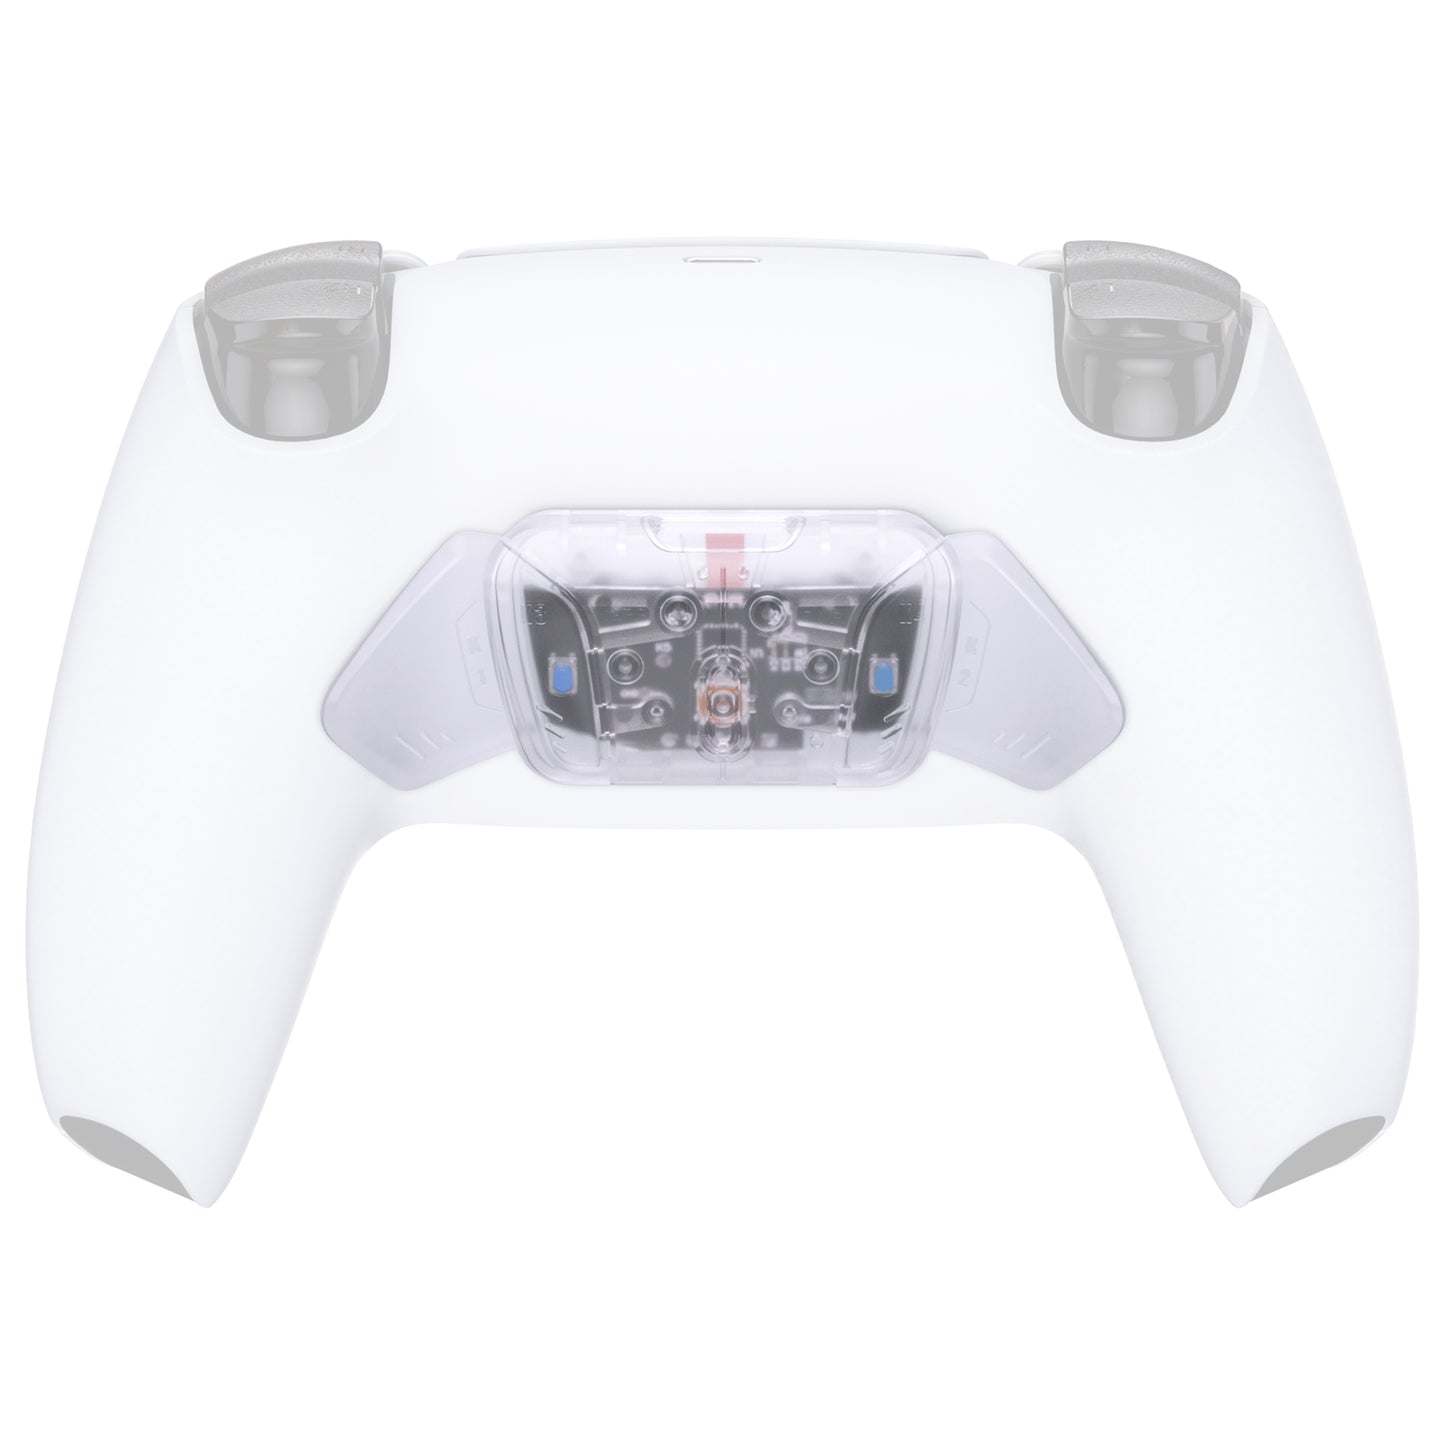 eXtremeRate Retail Turn RISE to RISE4 Kit - Redesigned Transparent Clear K1 K2 K3 K4 Back Buttons Housing & Remap PCB Board for ps5 Controller eXtremeRate RISE & RISE4 Remap kit - Controller & Other RISE Accessories NOT Included - VPFM5003P